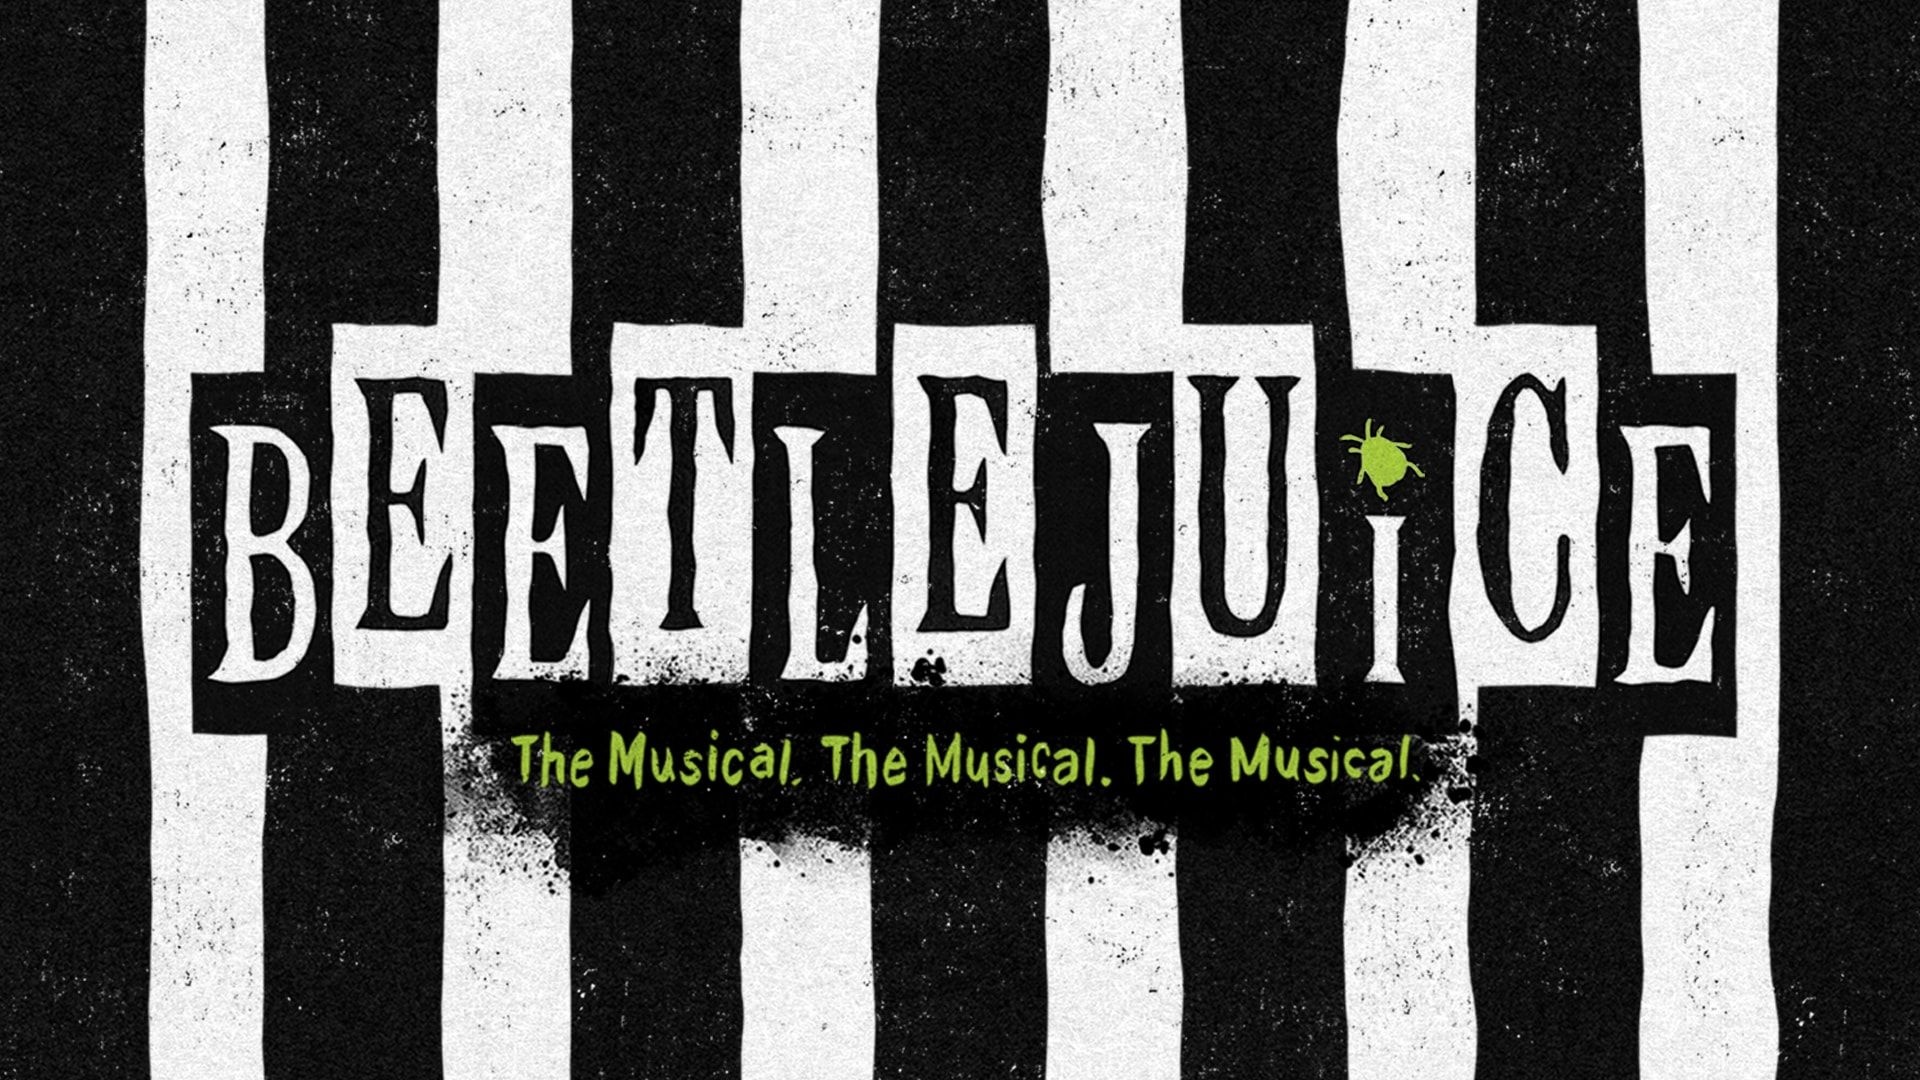 Beetlejuice (Cartoon): The Neitherworld, a ghoulish wacky monster supernaturalistic realm inhabited by monsters, ghosts, ghouls, goblins and zombies. 1920x1080 Full HD Wallpaper.